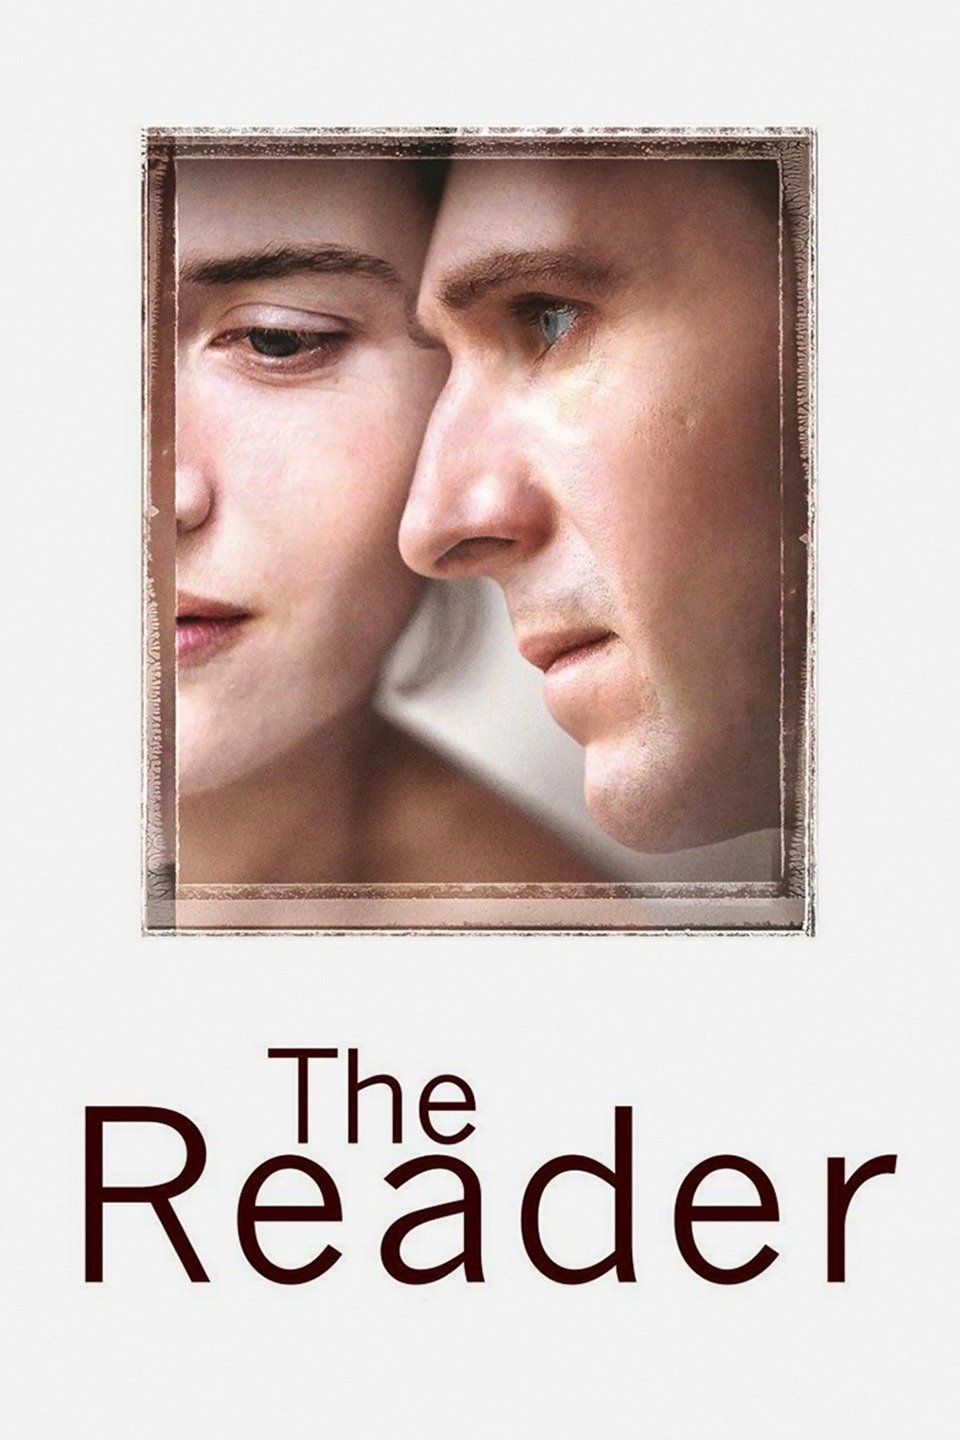 The Reader - Rotten Tomatoes